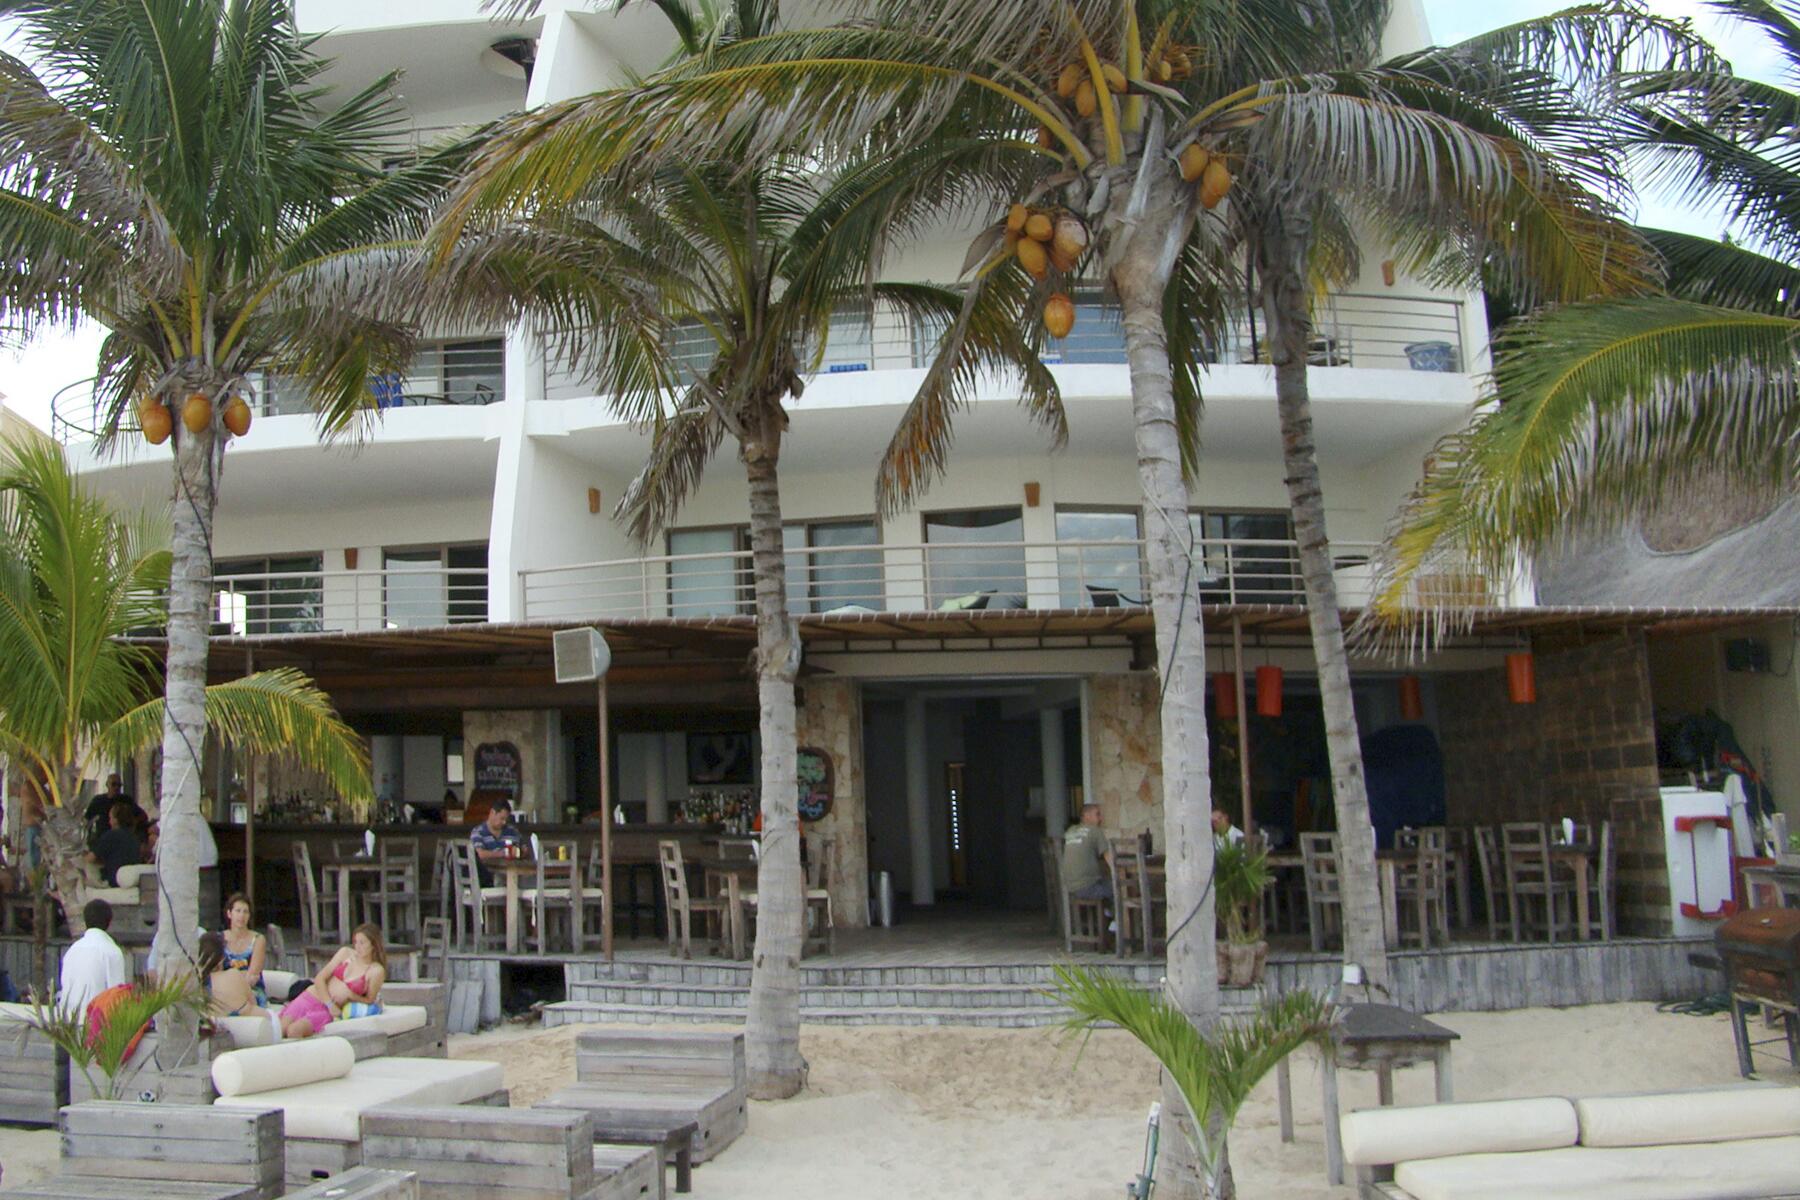 <a href='https://www.fodors.com/world/mexico-and-central-america/mexico/the-riviera-maya/experiences/news/photos/best-bars-and-nightclubs-in-riviera-maya#'>From &quot;The 10 Best Bars and Nightclubs in Riviera Maya: Zenzi Beach&quot;</a>